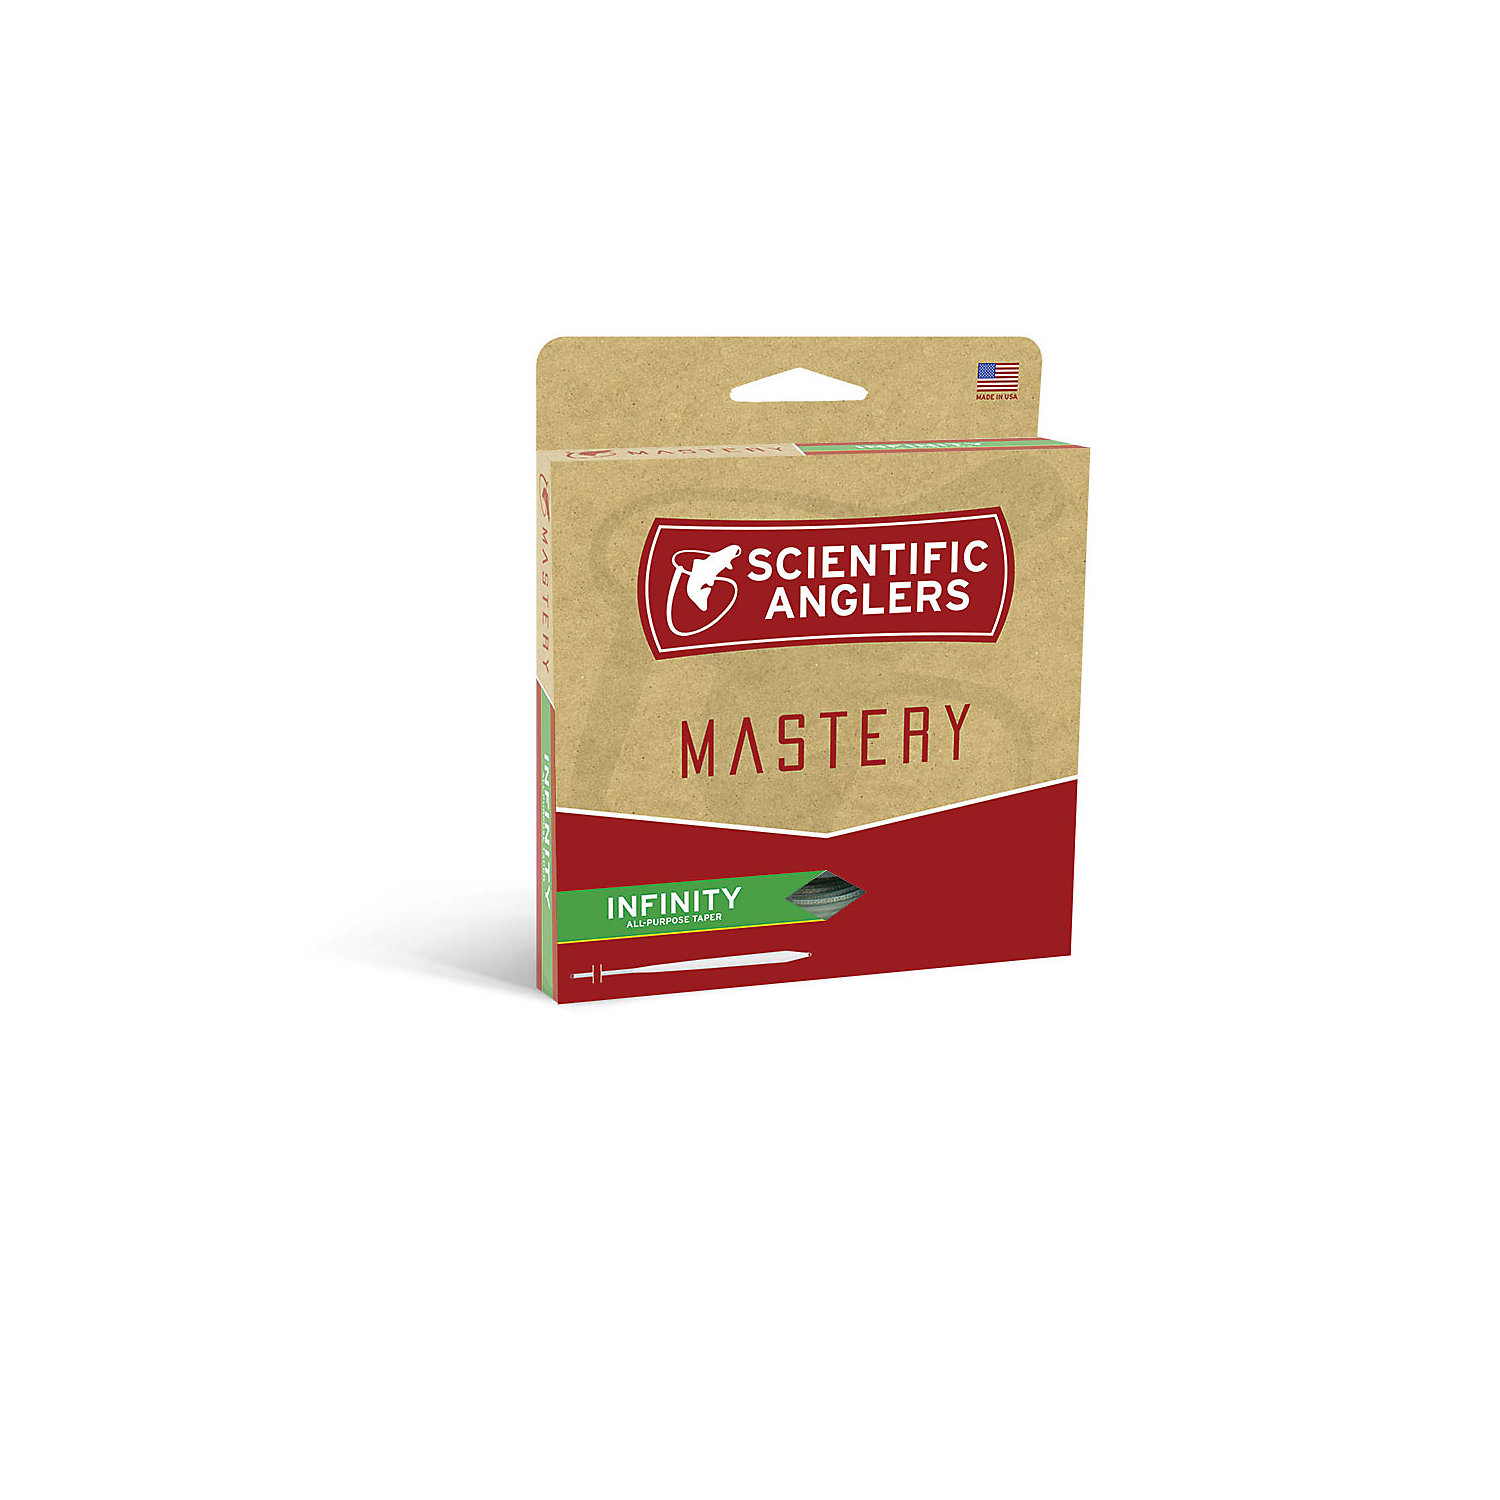 Scientific Anglers Mastery Infinity Line